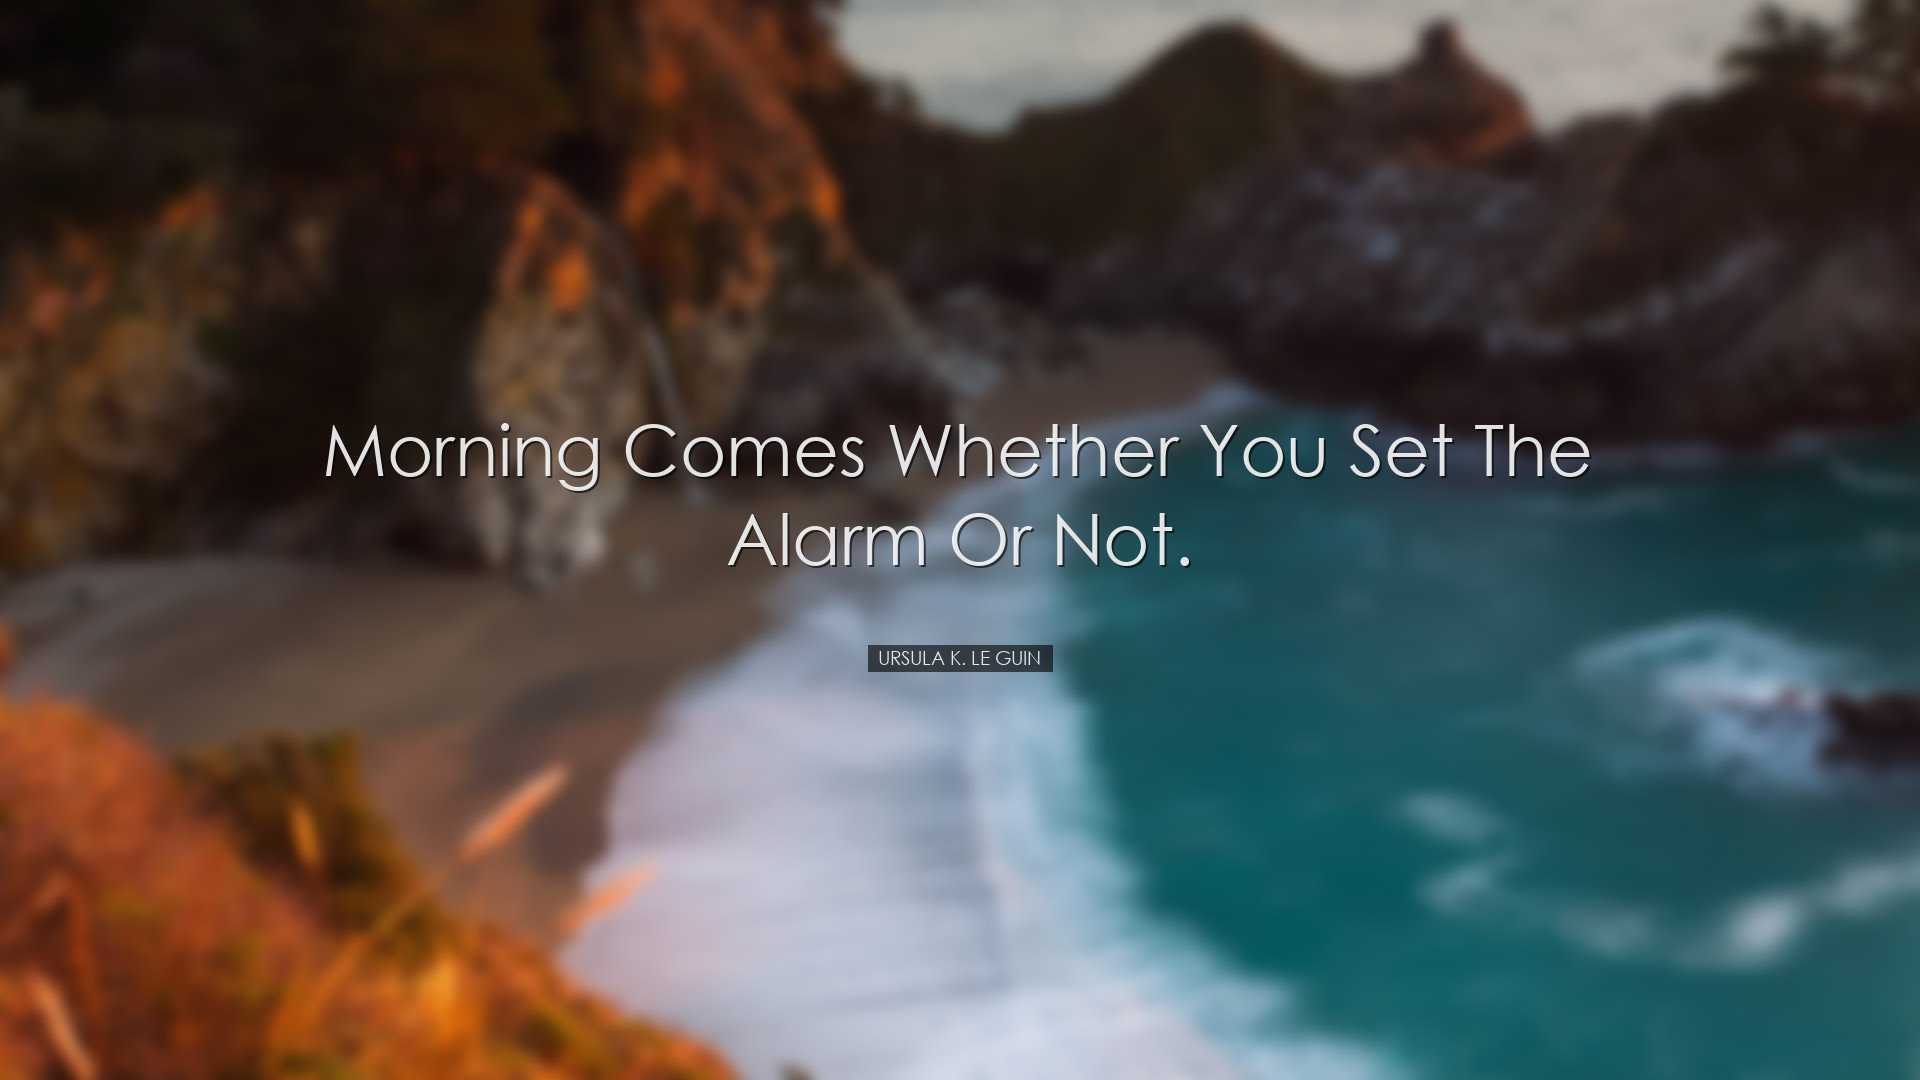 Morning comes whether you set the alarm or not. - Ursula K. Le Gui